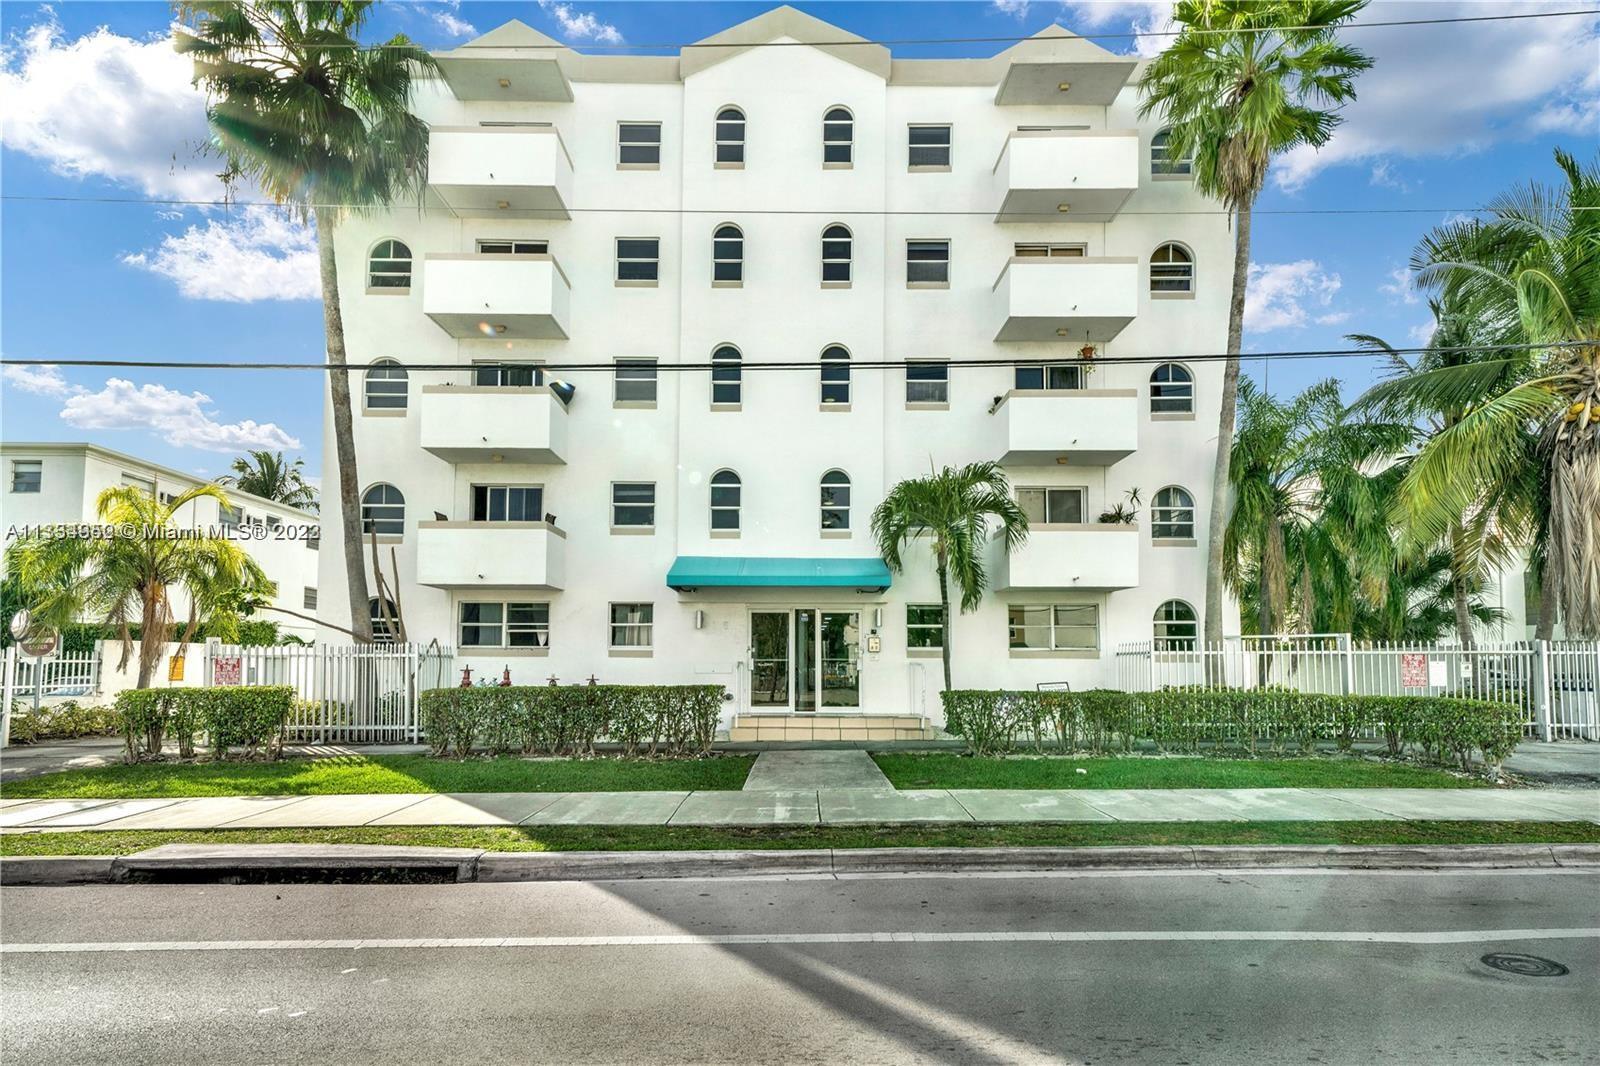 Welcome home to this charming 1 bedroom 2 full bath apartment in Coconut Grove. This condominium has an amazing location, short walk to downtown Coconut Grove, the new Metro Station with Target and Total Wine coming soon, and It is a 10 min walk to S. Bayshore Dr with Kennedy Park and the new Regatta Harbour Marina with its shops and dining. Within minutes to all the action in Miami that your heart desires. The unit is located on the first floor, with tile floors throughout, and washer dryer in the unit. The kitchen has wood cabinets and granite countertops. The master bedroom has a large walk-in closet and en-suite bathroom. New A/C and condenser unit installed 1 year ago. Available for February 1st occupancy. Good income and credit a MUST. 1st, last, and security deposit to move in.